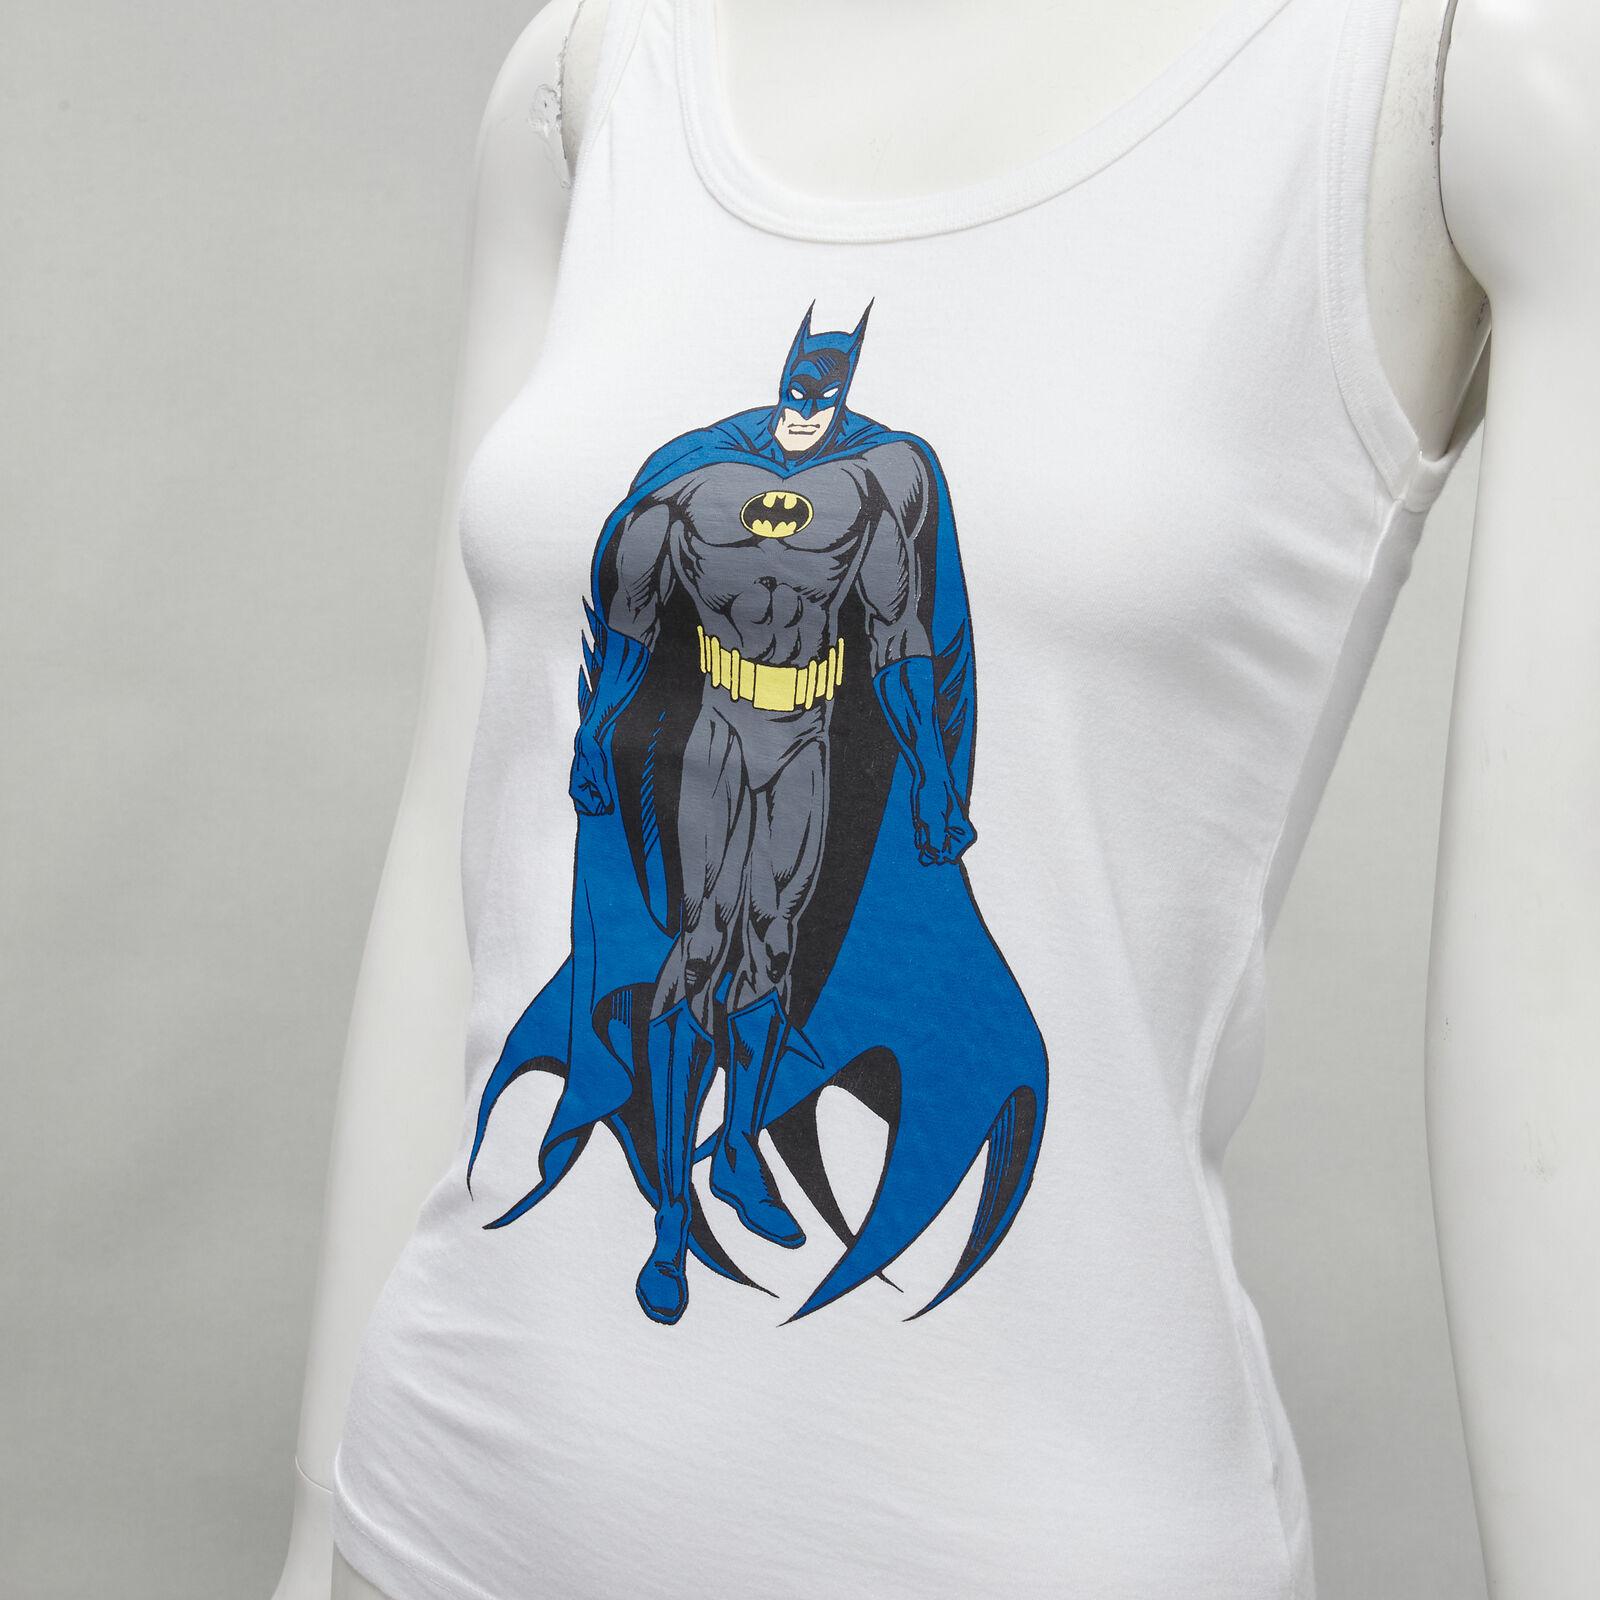 D&G DOLCE GABBANA Vintage Y2K Batman DC Comics white tank top S
Reference: ANWU/A01033
Brand: D&G
Designer: Domenico Dolce and Stefano Gabbana
Collection: Batman Limited Edition
Material: Feels like cotton
Color: White, Blue
Pattern: Photographic